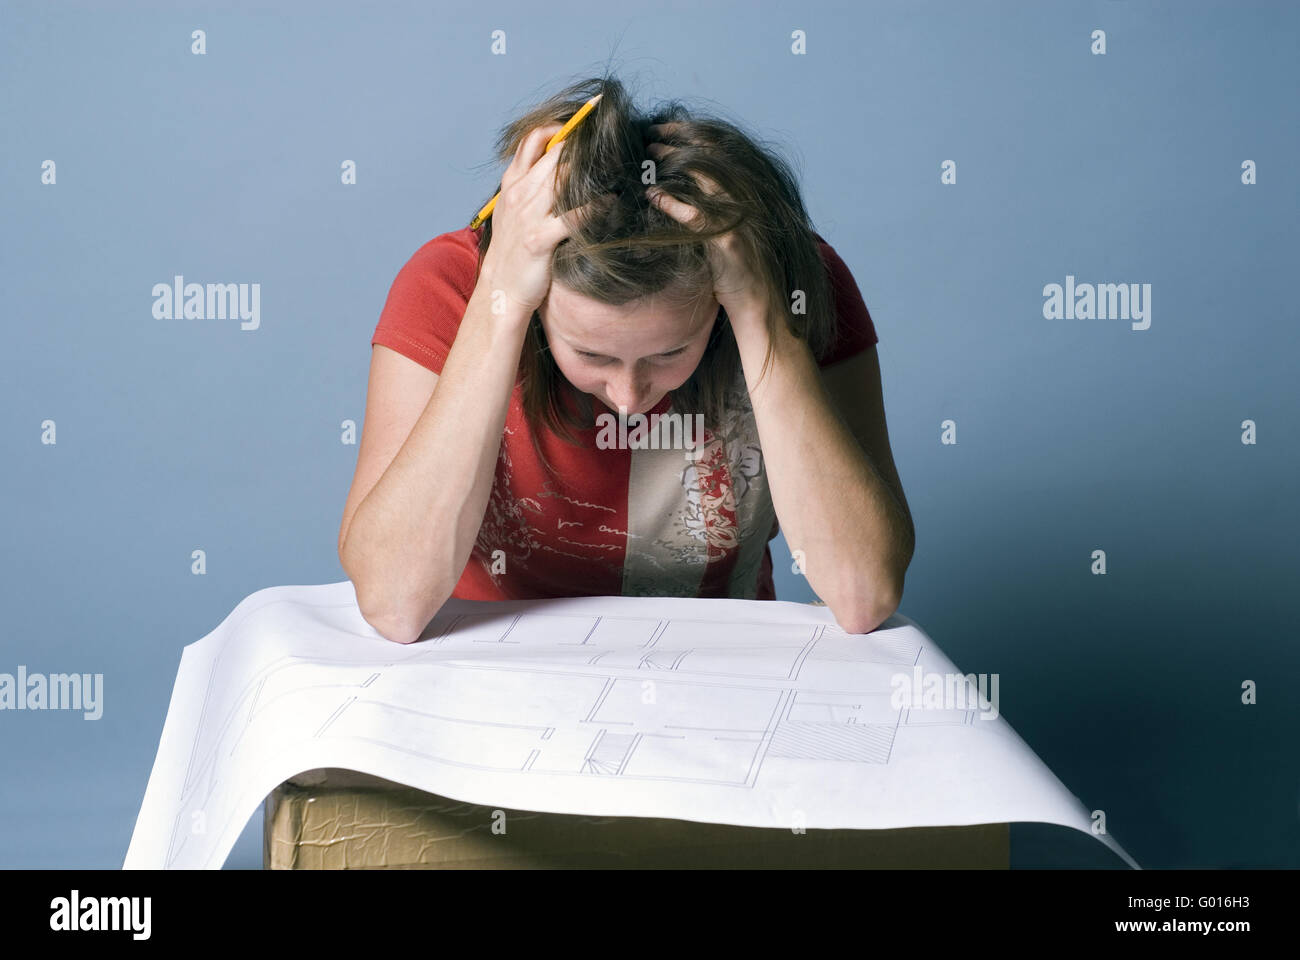 frustrated Stock Photo